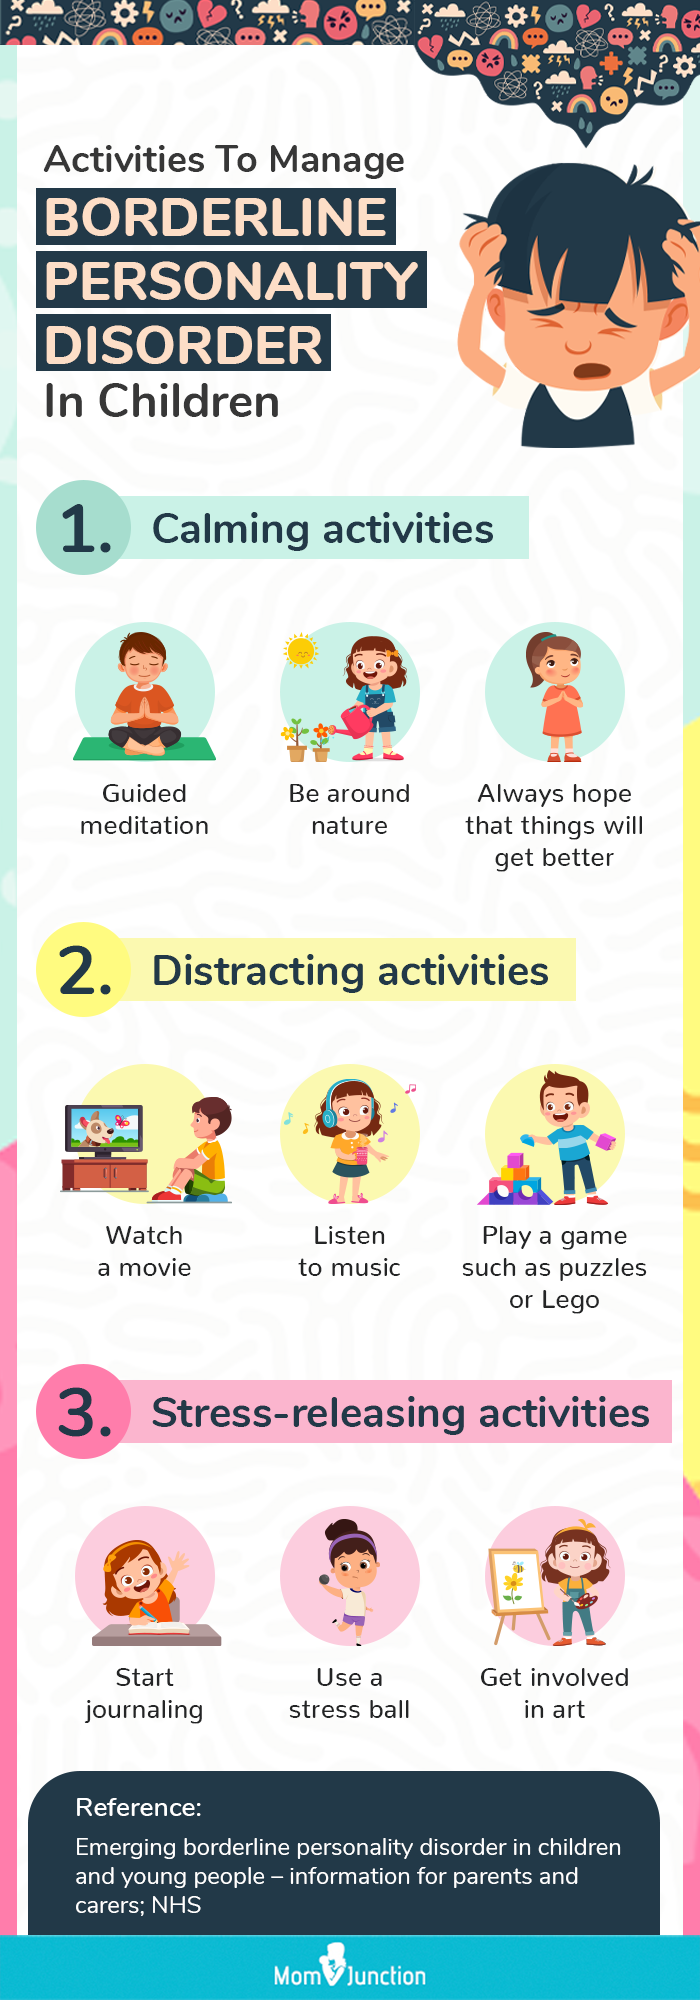 activities to manage borderline personality disorder in children (infographic)